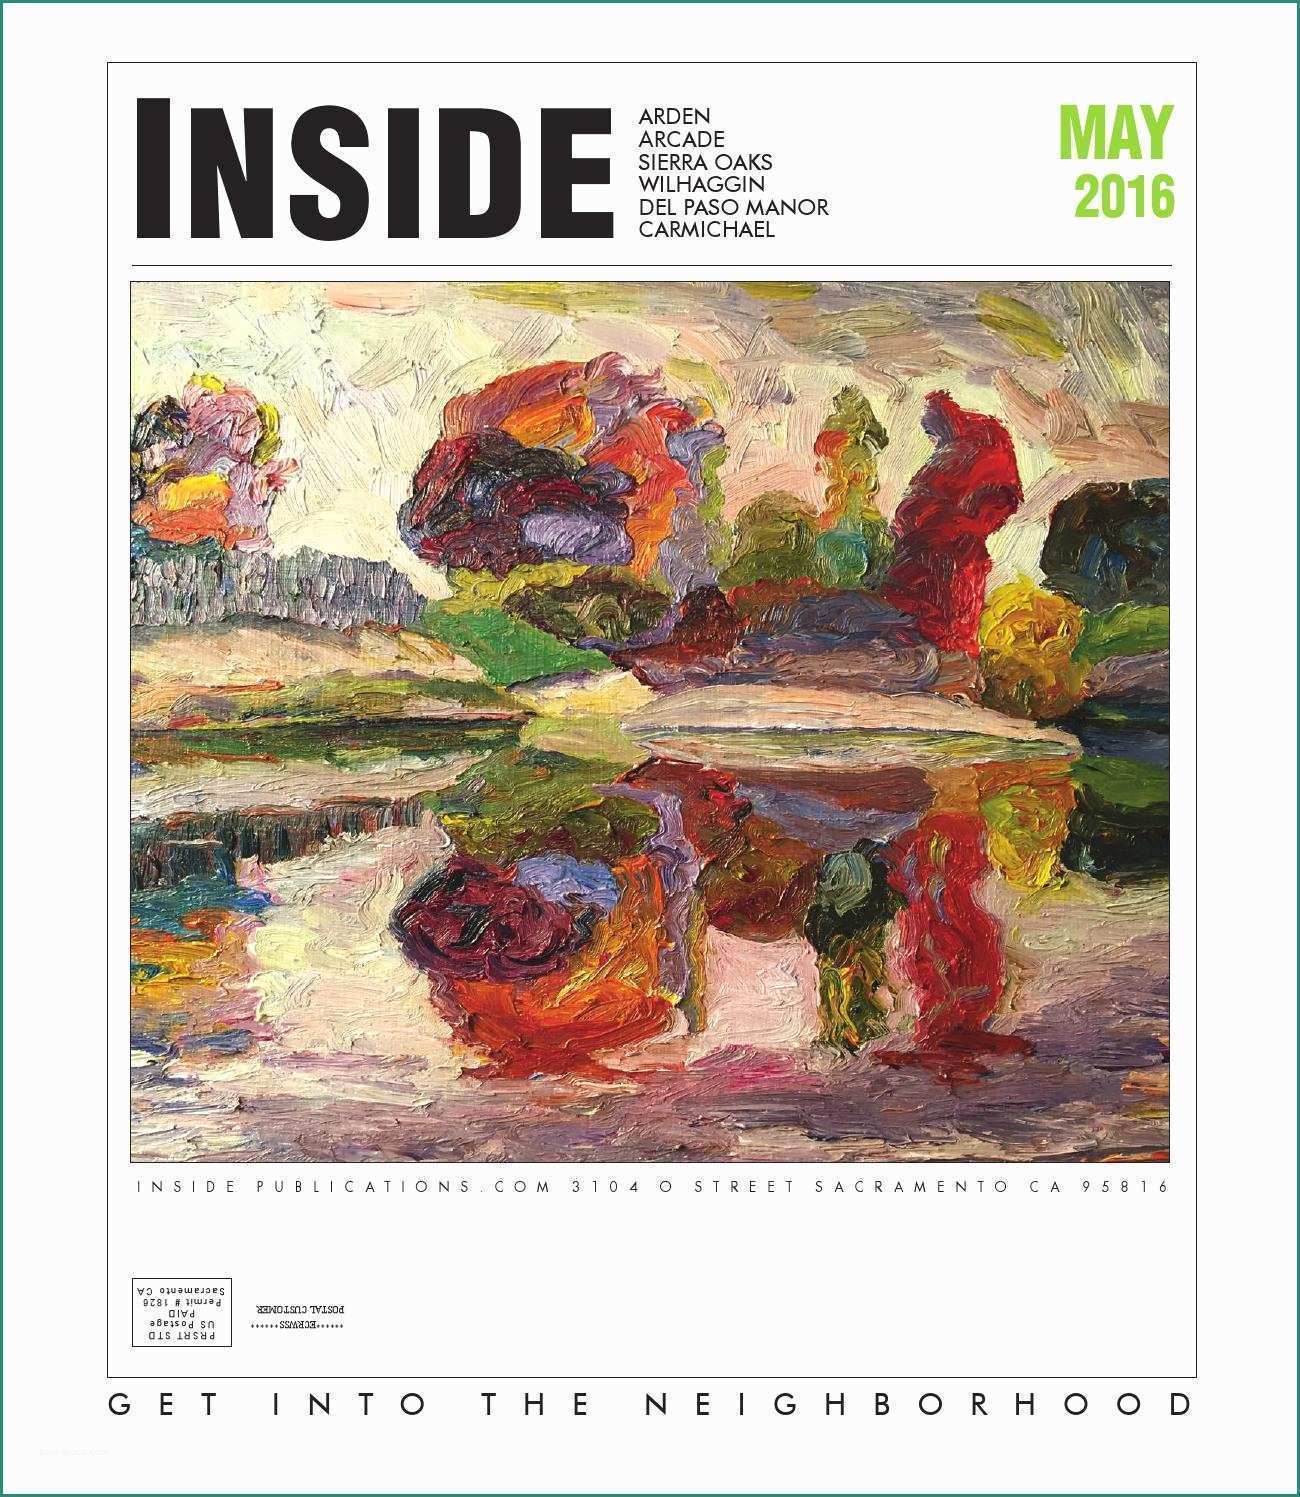 Mobile Bar Moderno E Inside Arden May 2016 by Inside Publications issuu